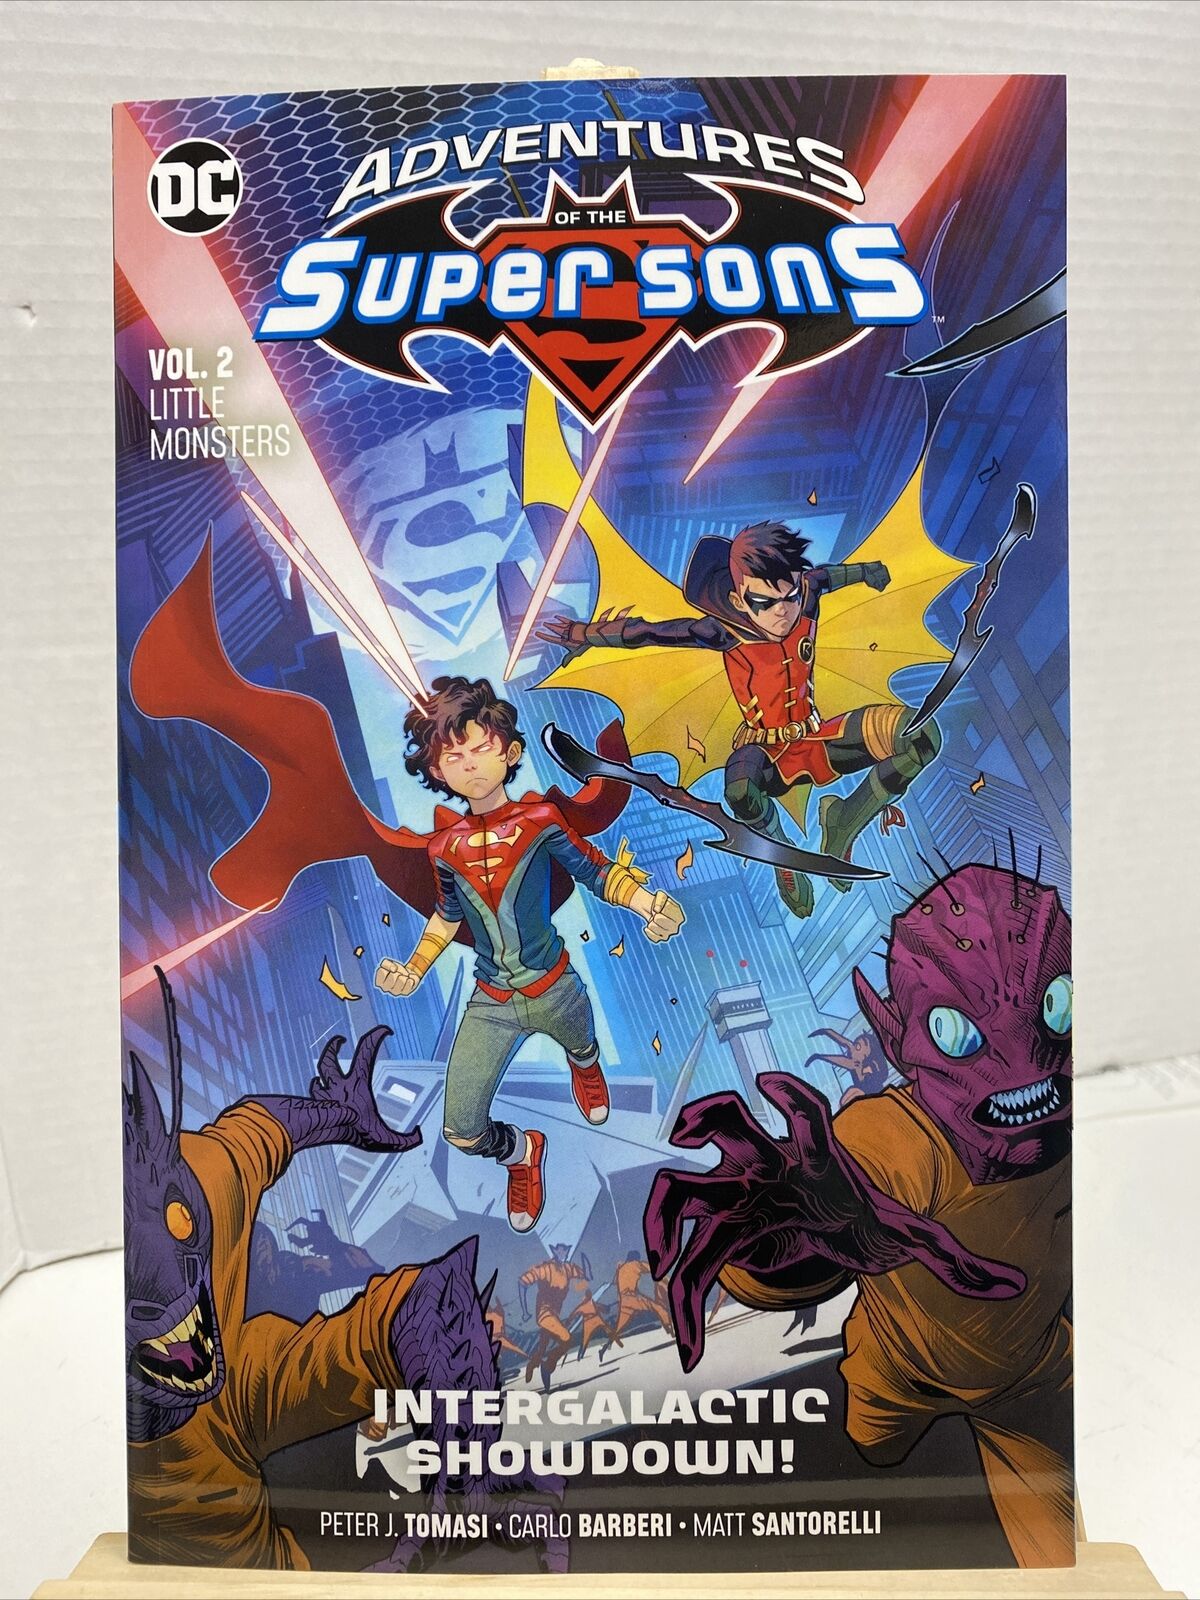 Adventures of the Super Sons Vol 2 Little Monsters 1st print 10/18/19 *NEW* TPB